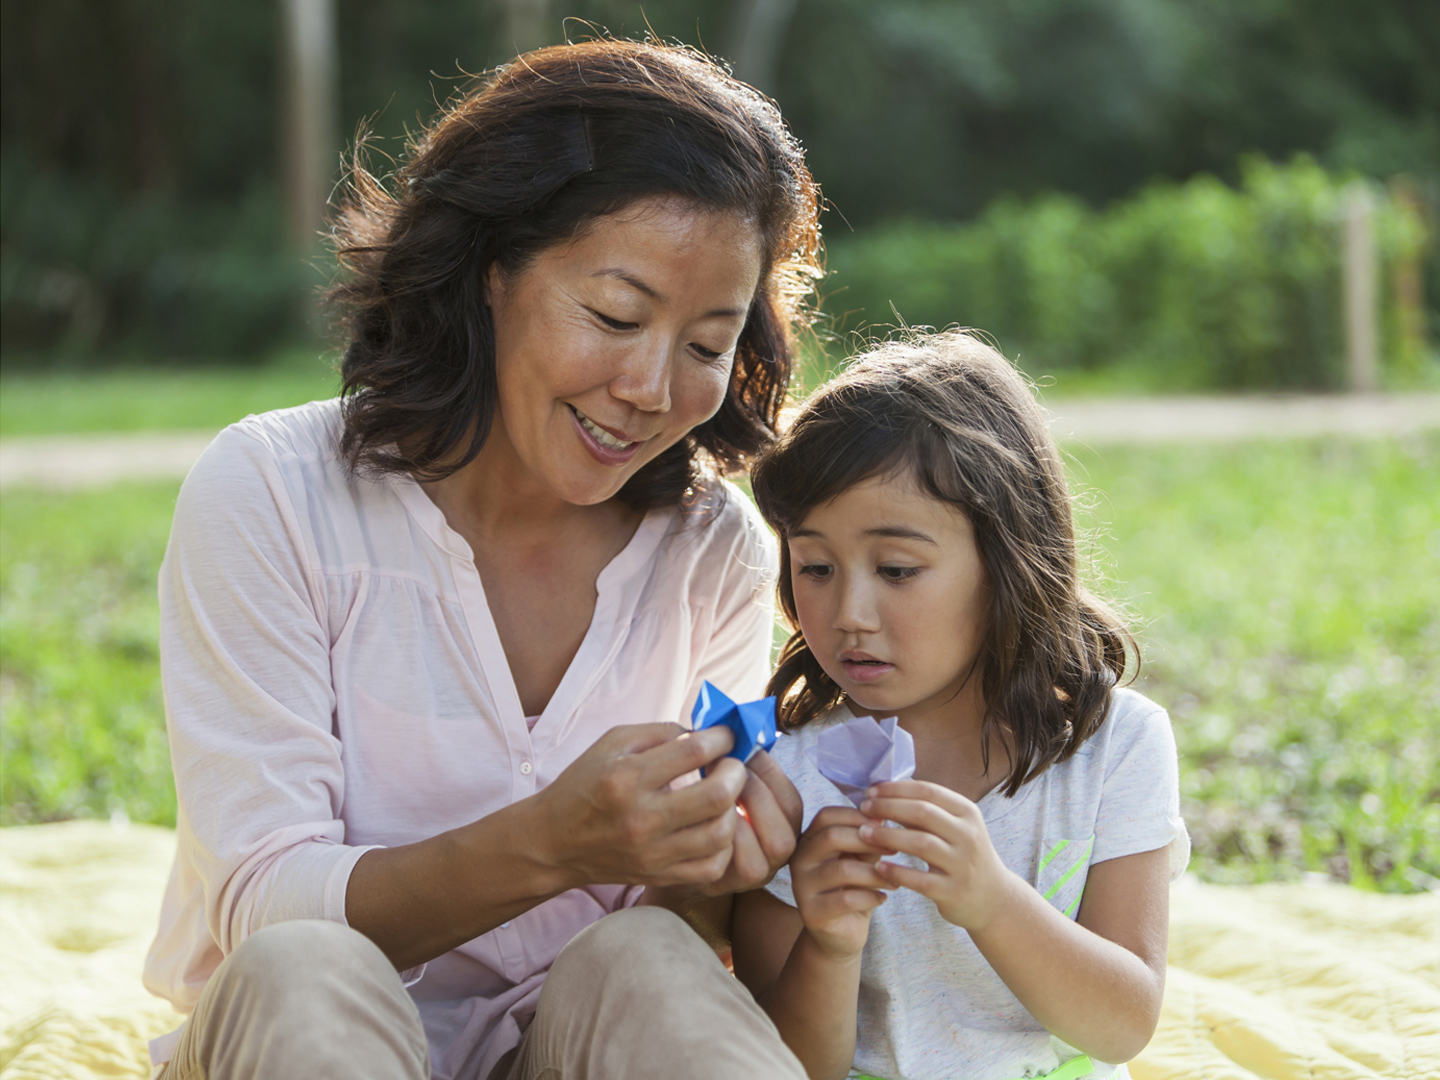 Japanese woman showing her daughter how to fold paper into a flower, doing origami.  They are at the park, sitting on a blanket on the grass.  The mother has a smile on her face and the little girl is serious, looking down at the paper.